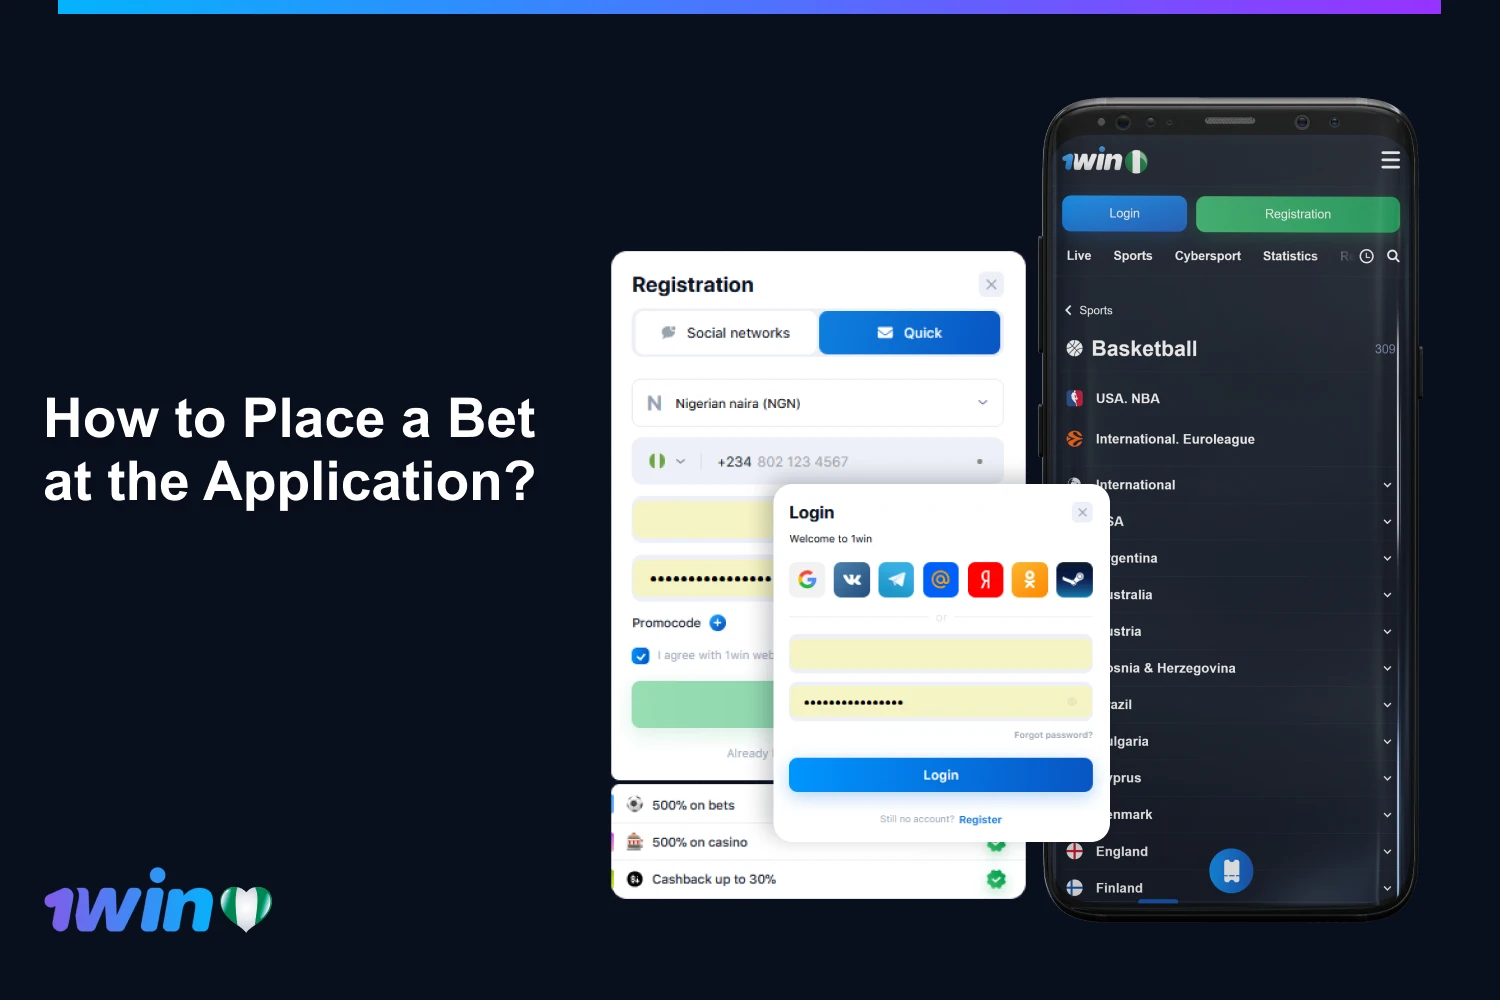 Nigerians find it easy to bet through the 1win app thanks to its user-friendly interface